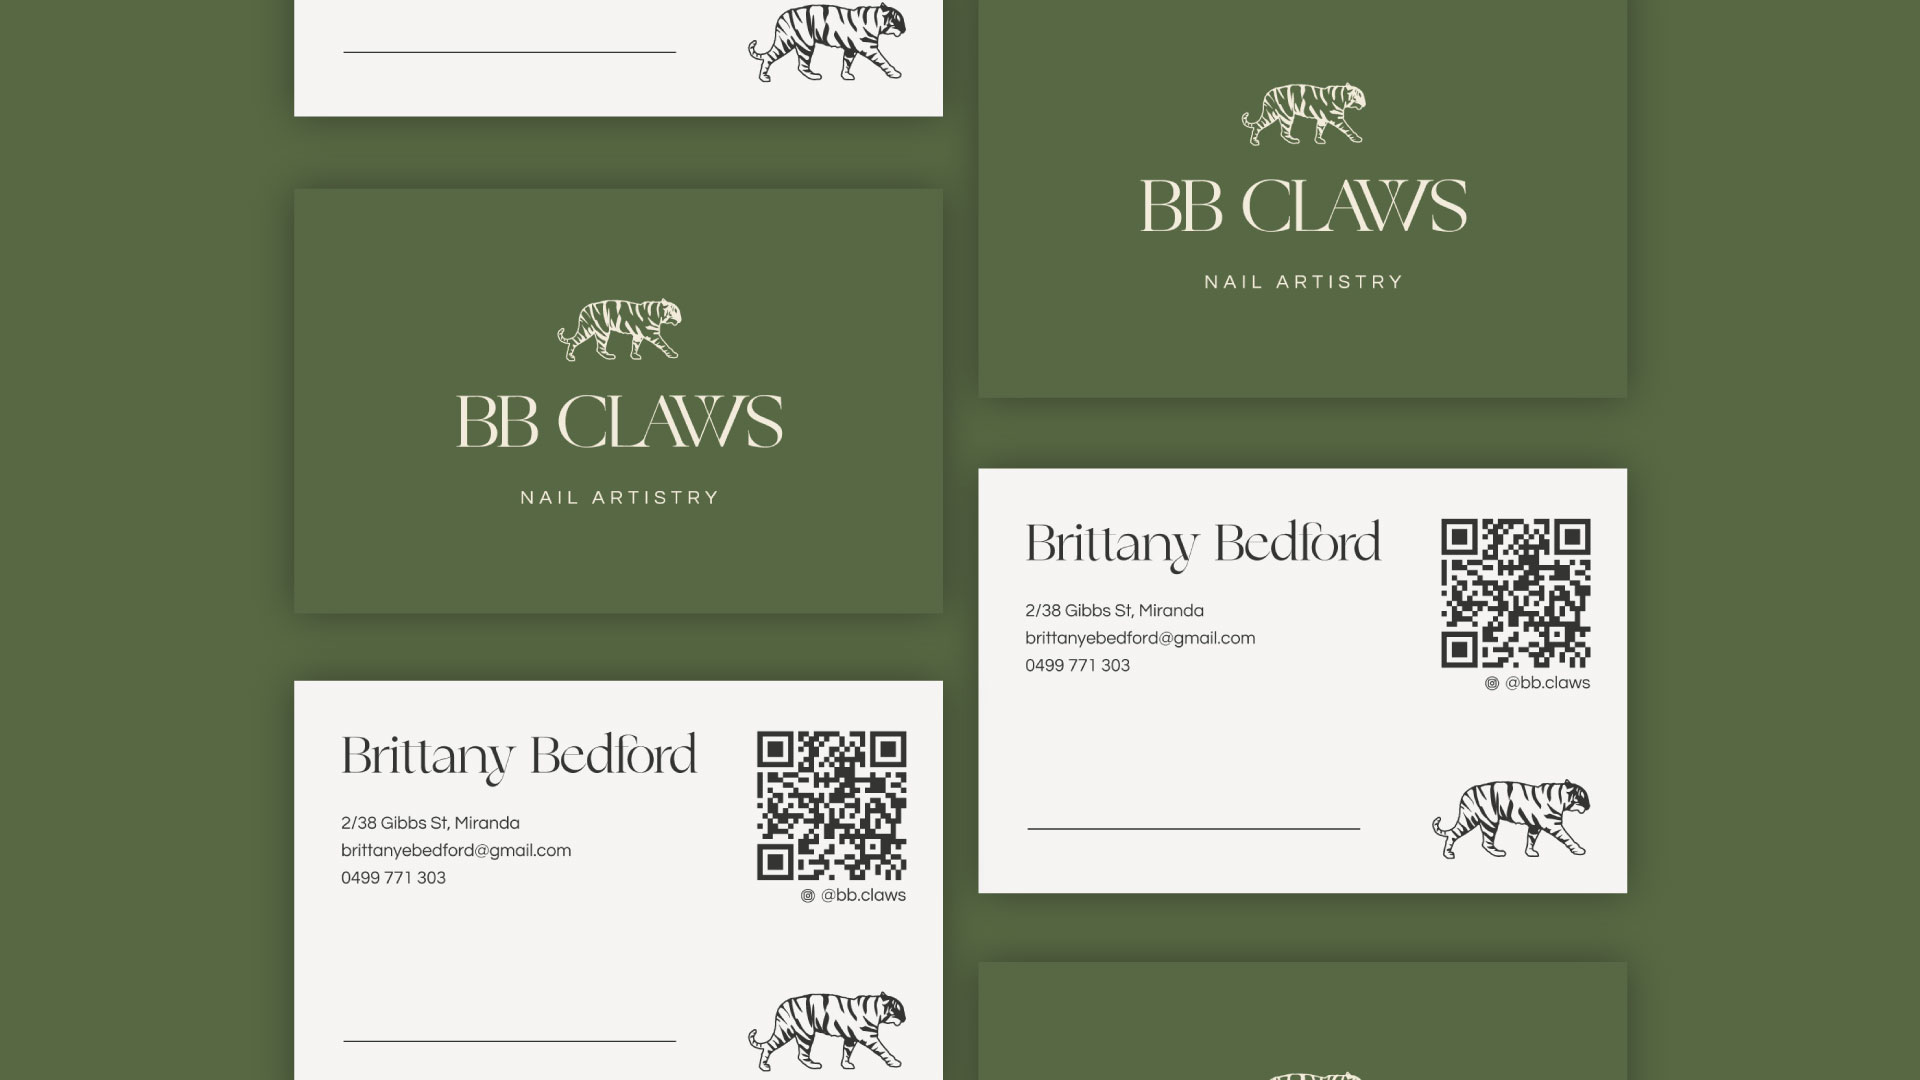 BB Claws Brand Identity business cards by NP Creative